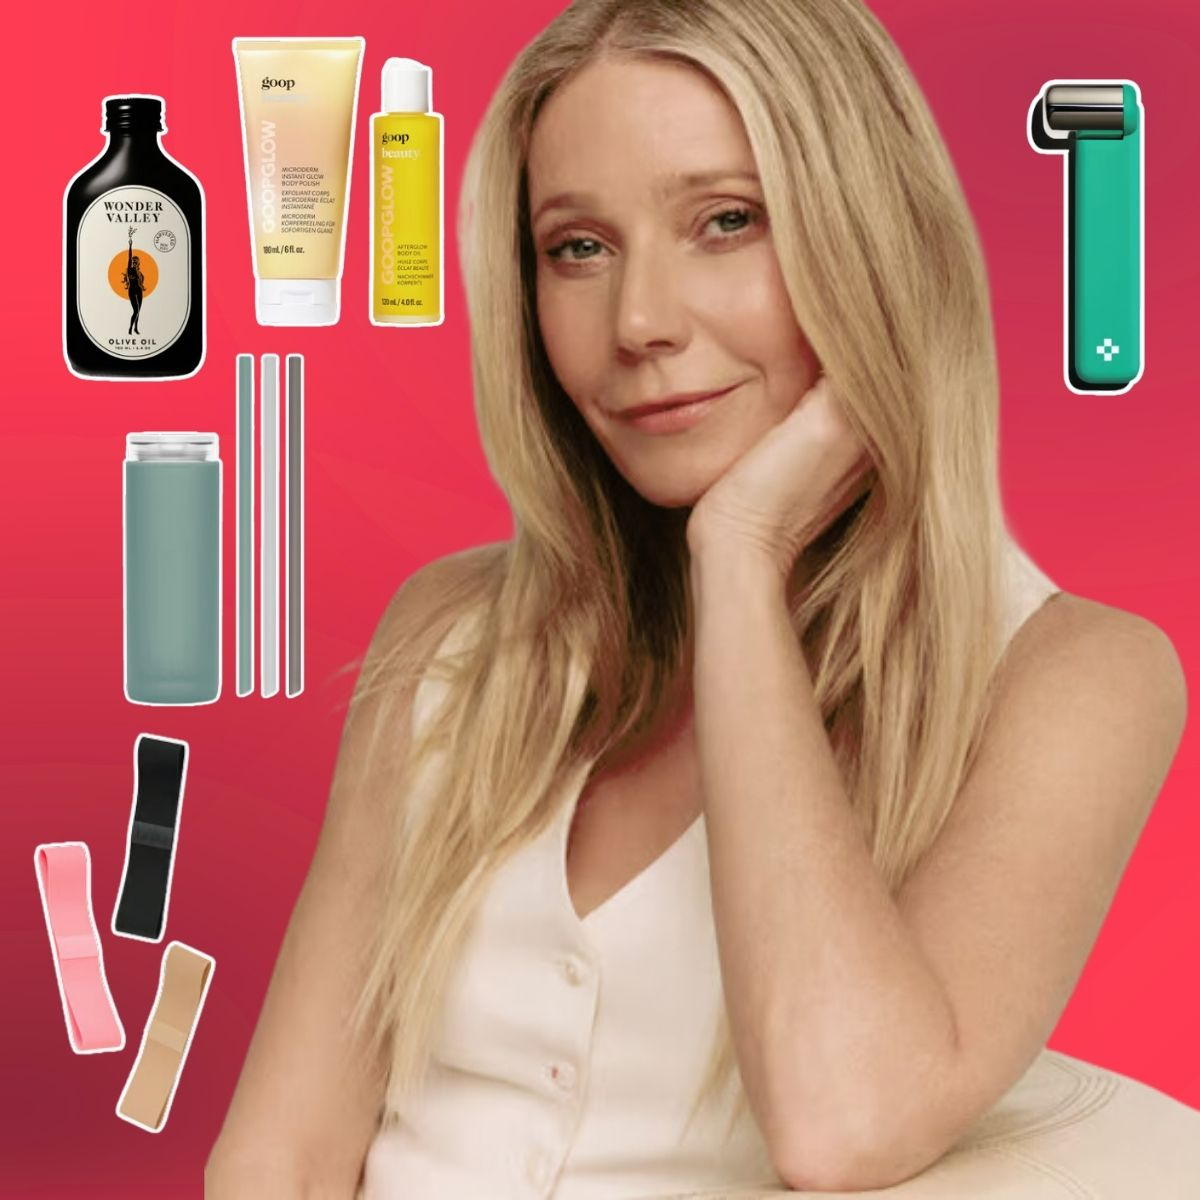 12 Things From Goop's $100K+ Holiday Gift Guide We'd Actually Buy